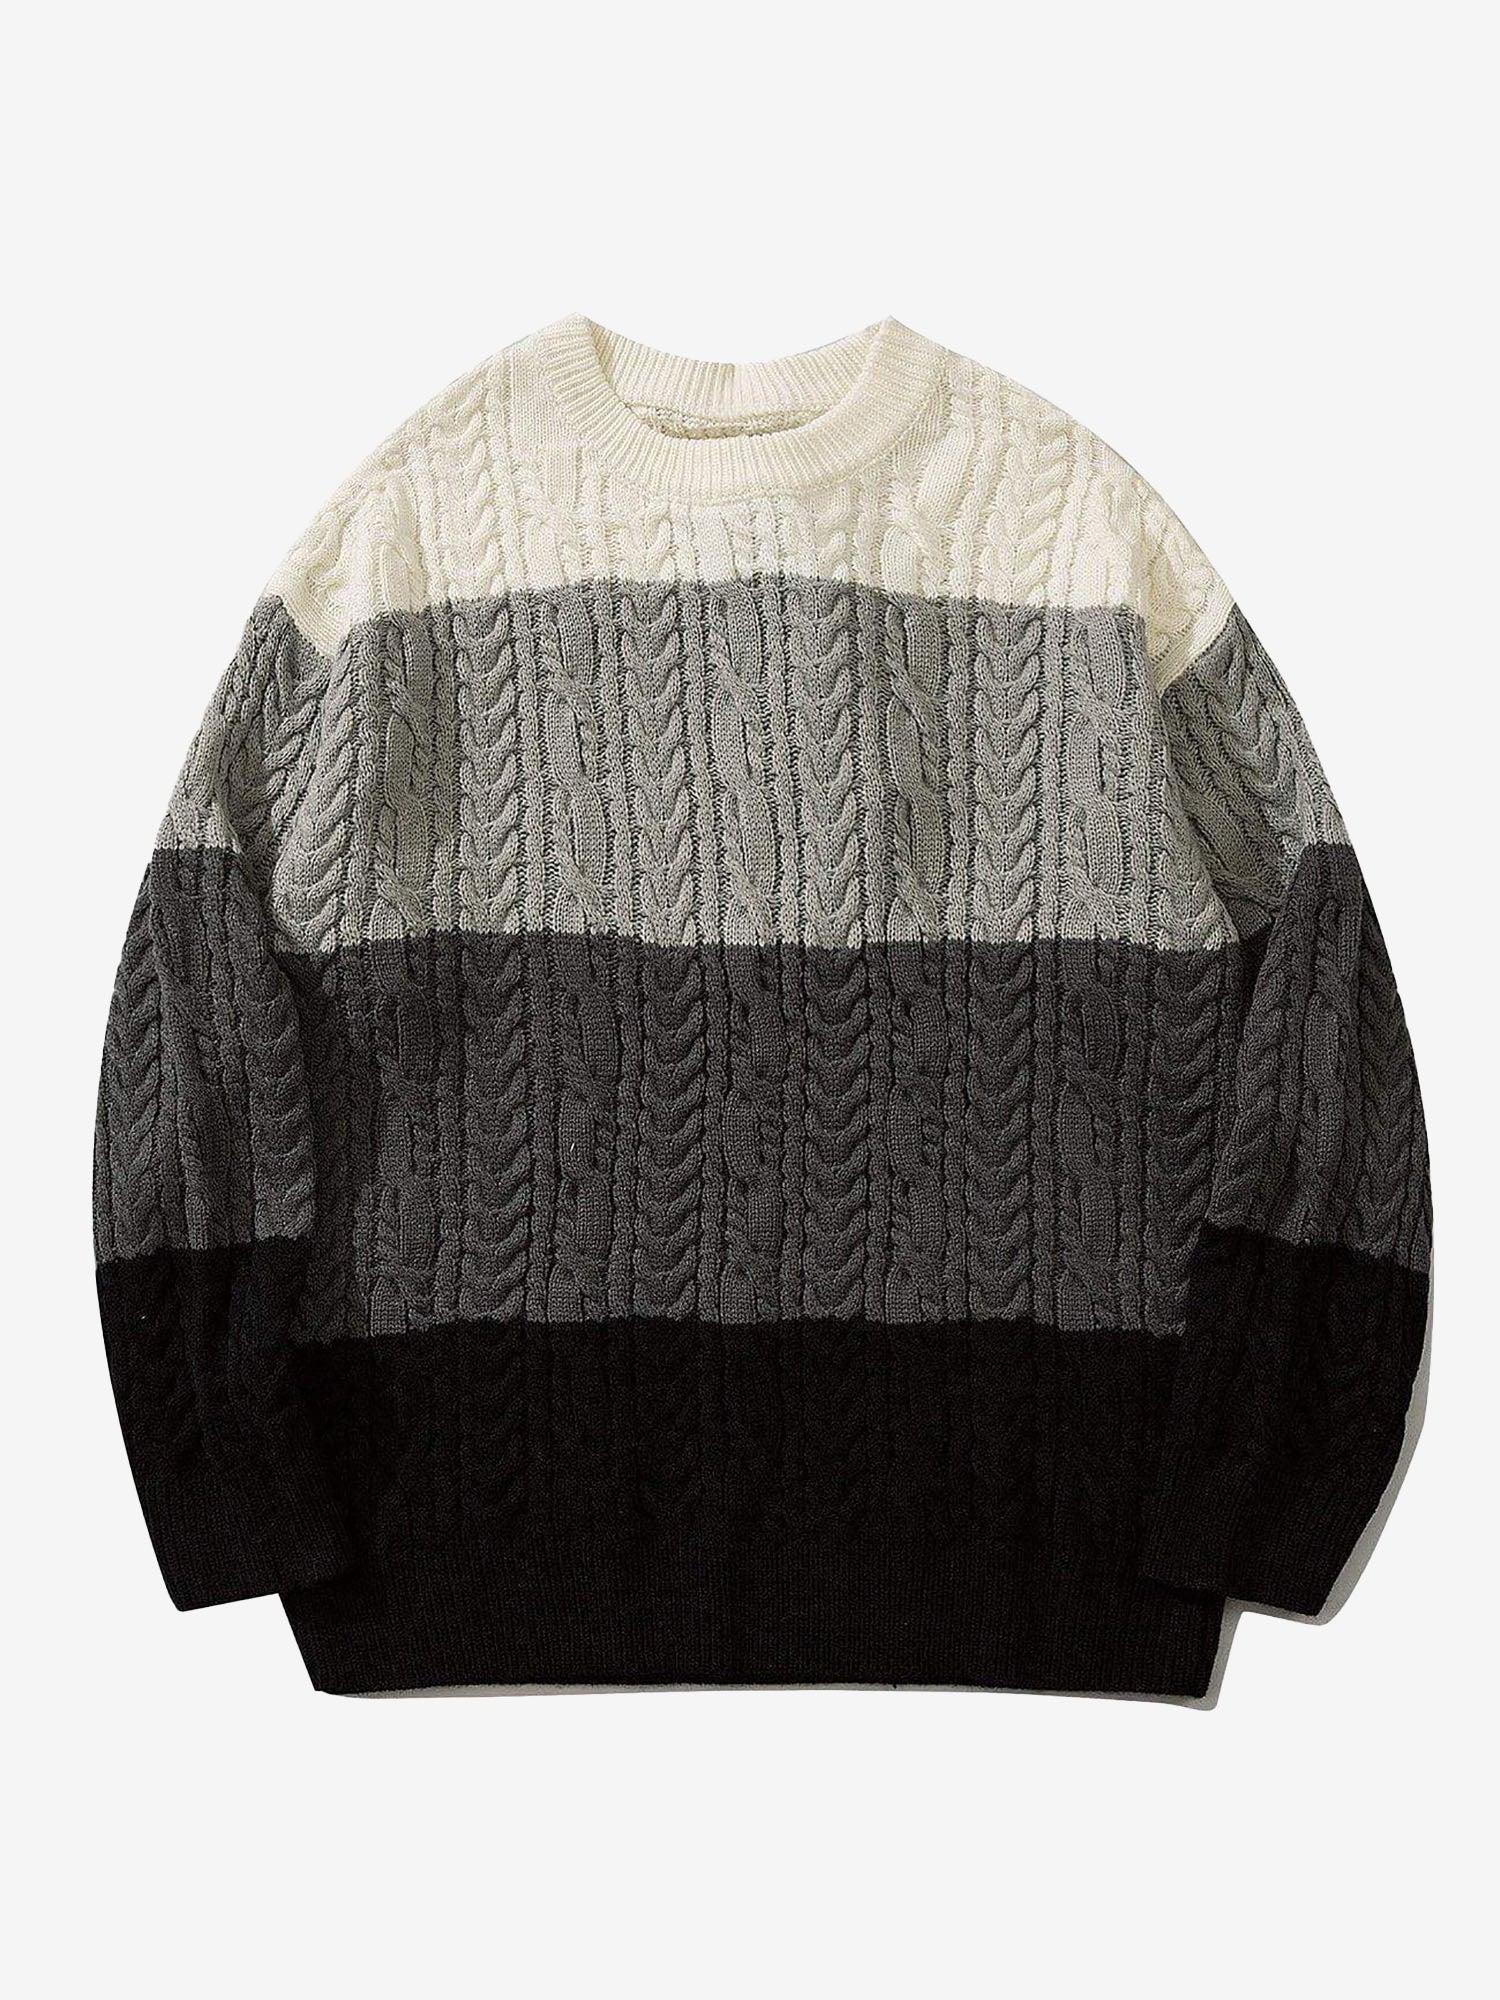 JUSTNOTAG Patchwork Striped Knitted Sweater